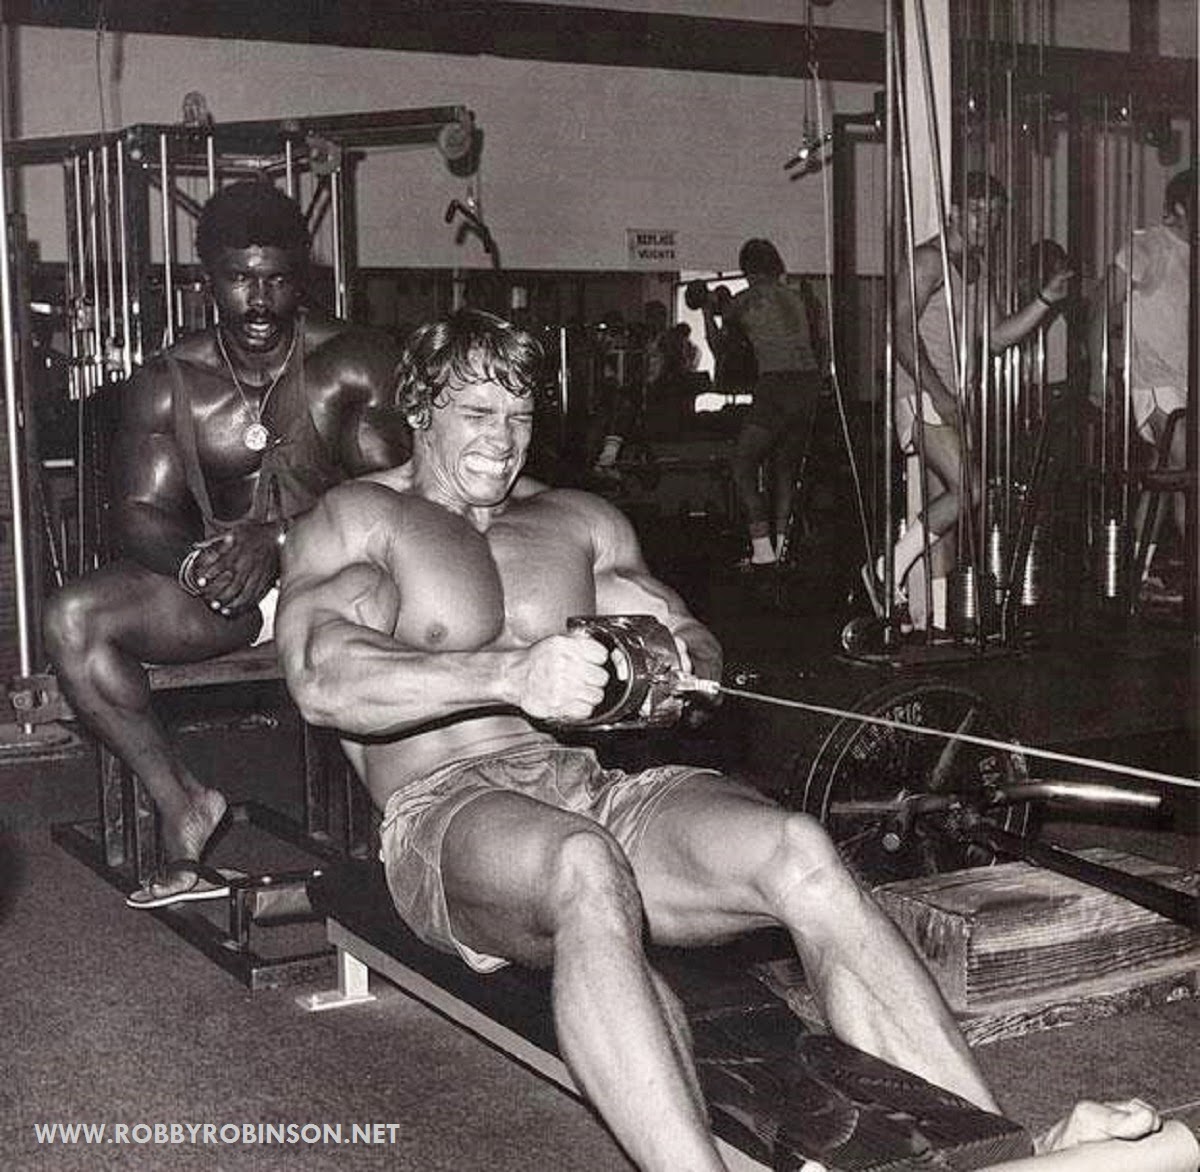 Robby Robinson and Arnold Schwarzenegger training during  filming of bodybuilding cult movie Pumping Iron at Golds's in 1975 ● www.robbyrobinson.net/dvd_built.php ● 